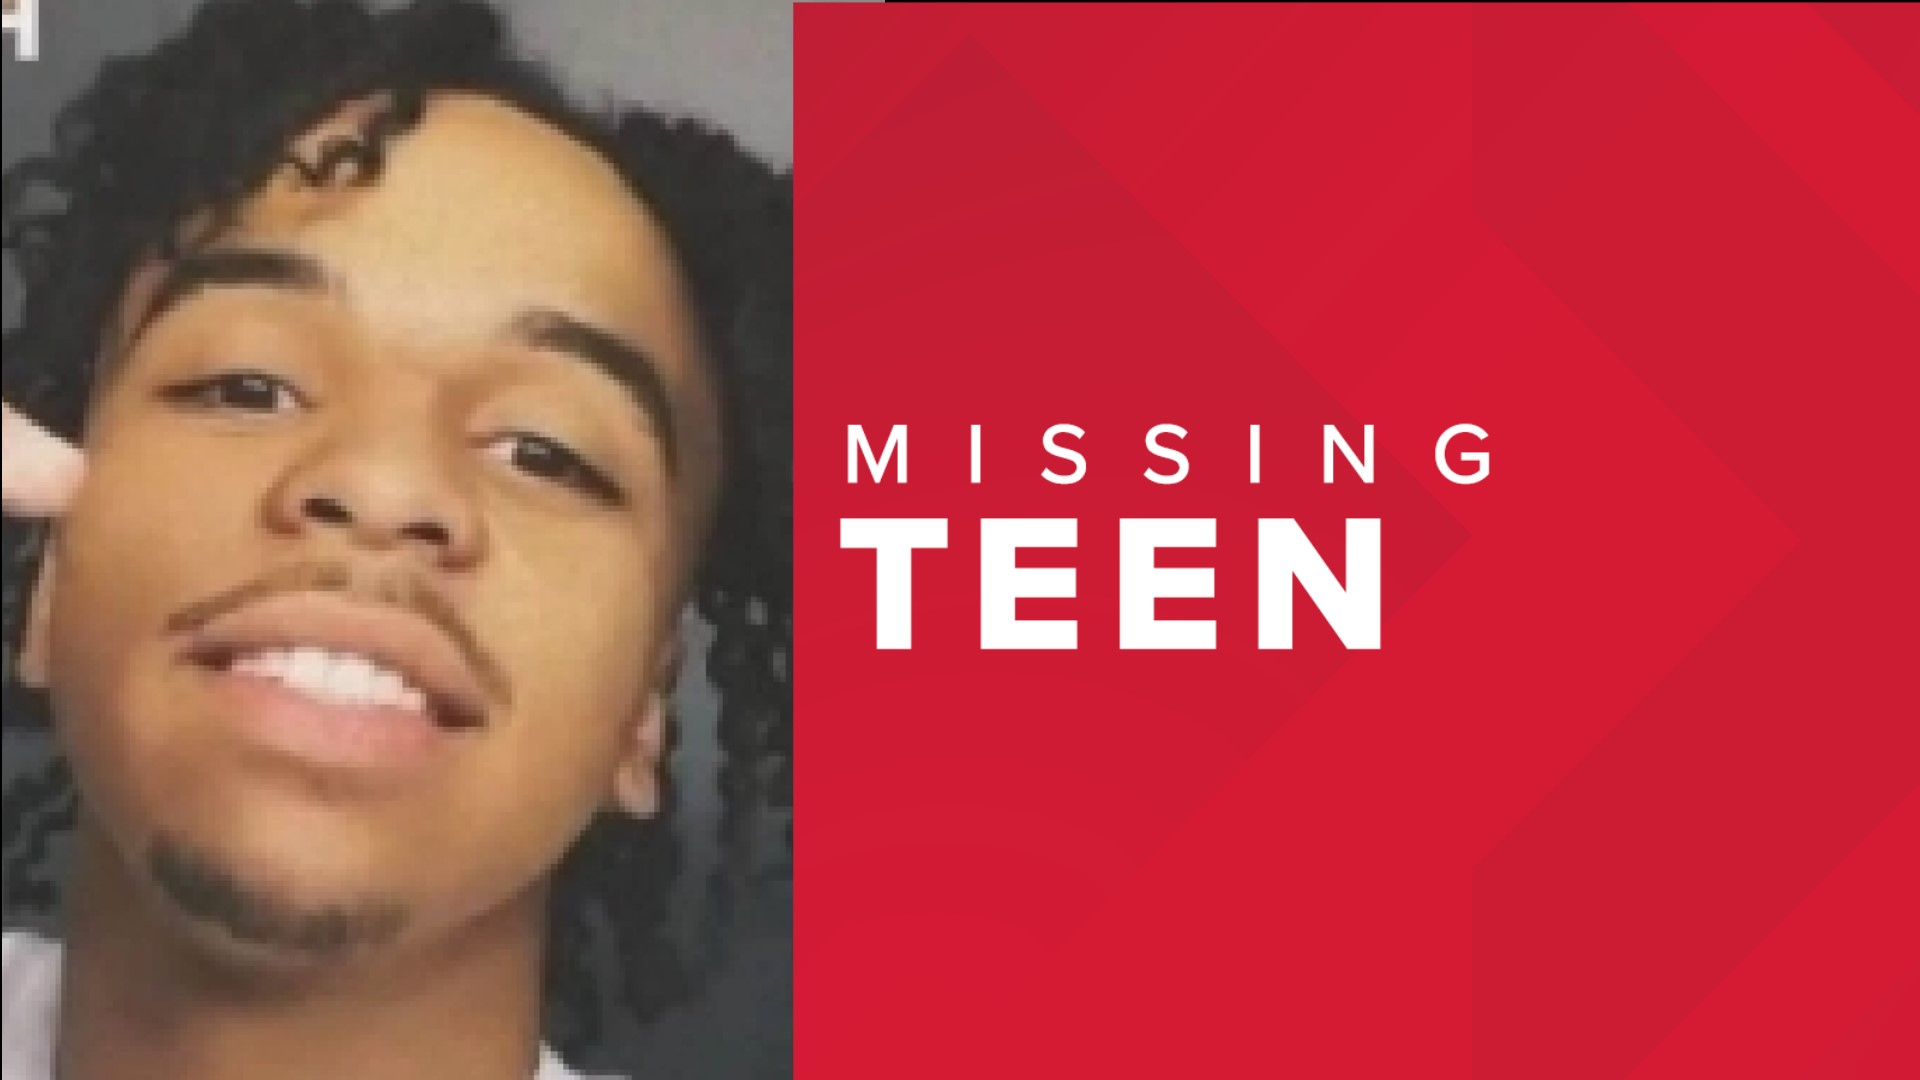 Police said on Monday that Imperial Stewart was reported missing and last seen in the area of Cleveland Avenue and Huy Road in the North Linden neighborhood.